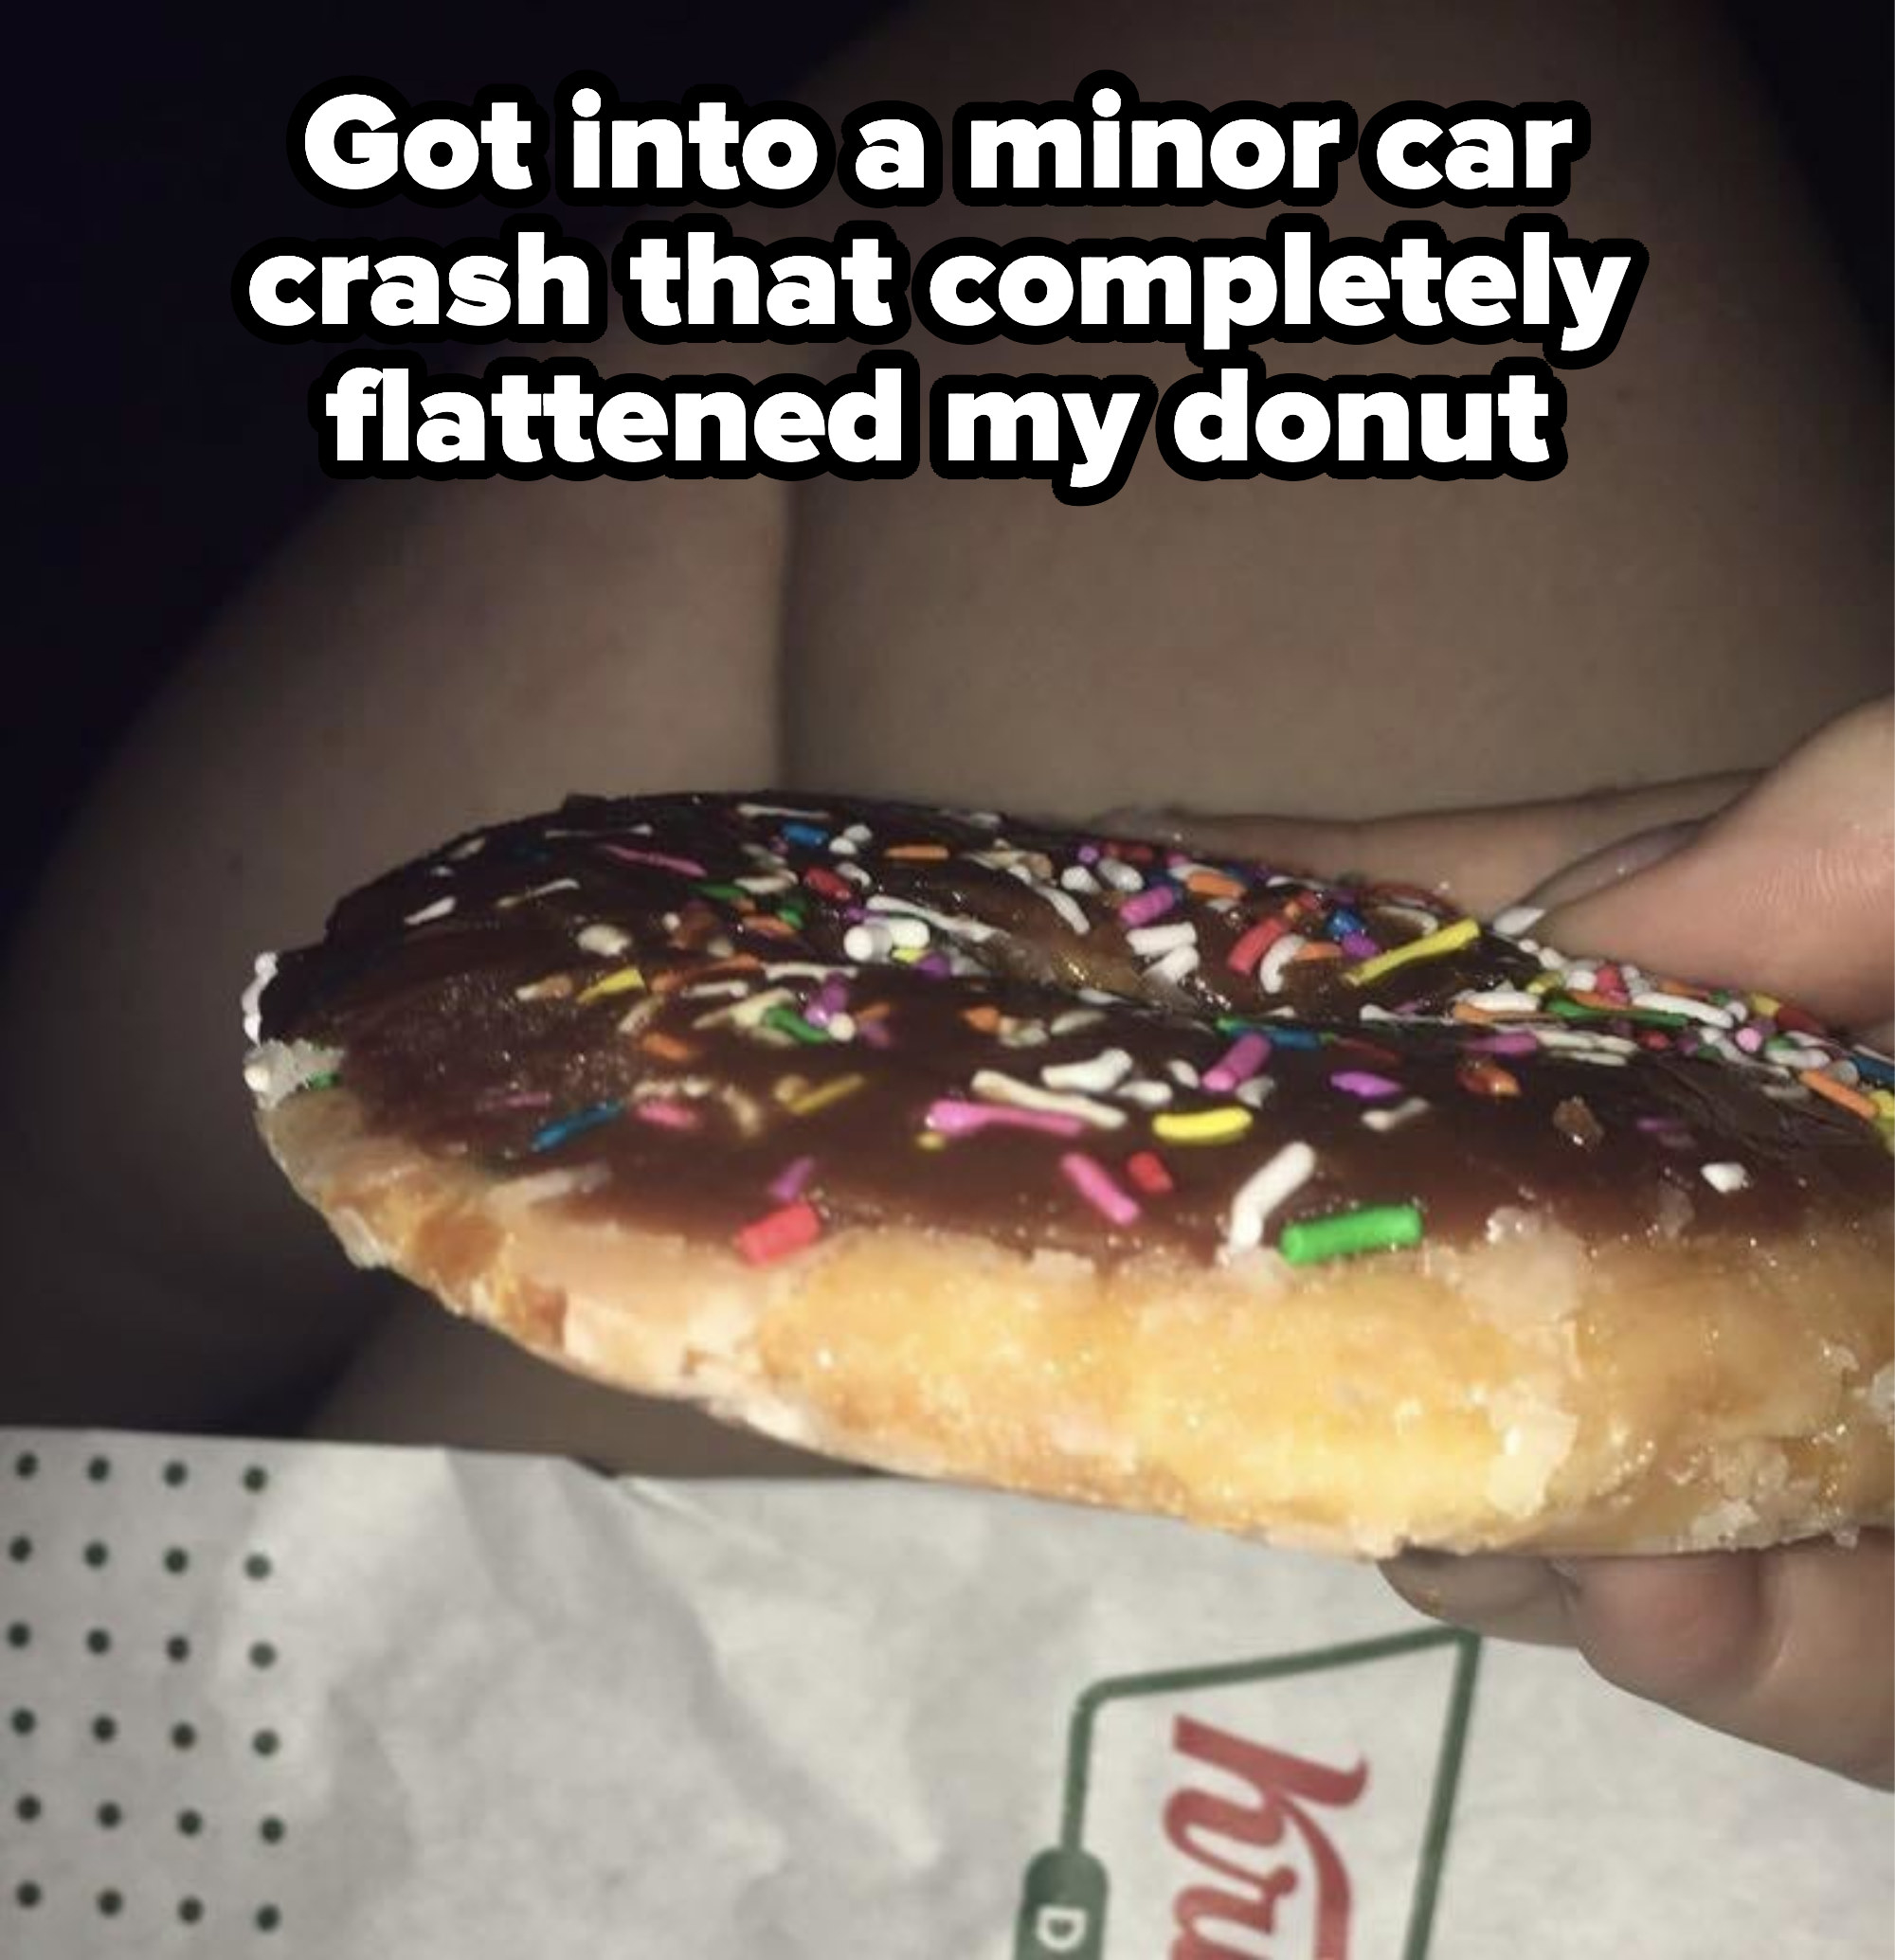 They got into a minor car accident that flattened their donut with sprinkles